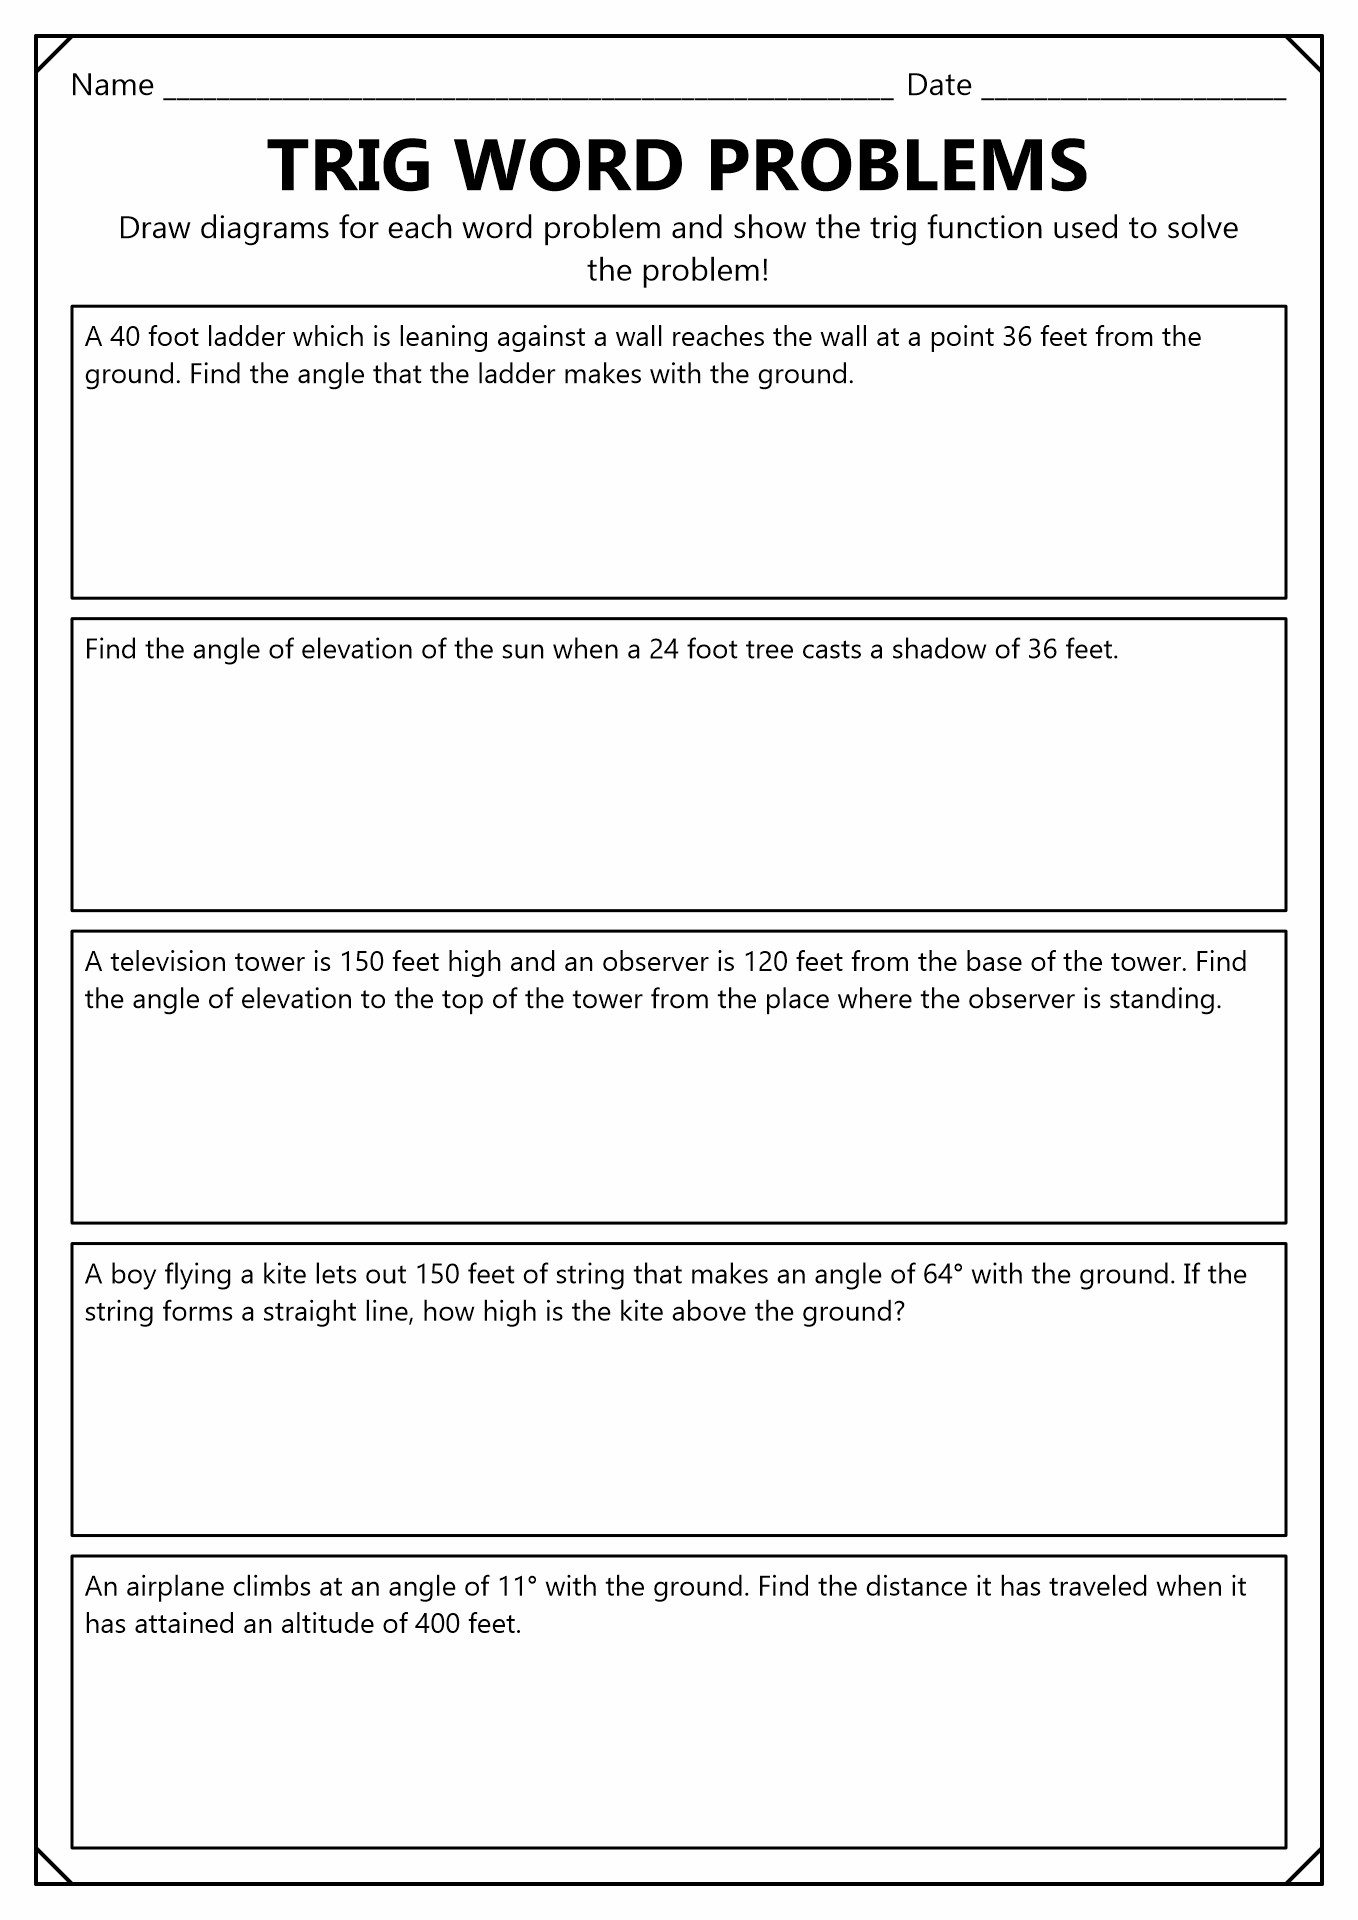 Right Triangle Trig Word Problems Worksheet